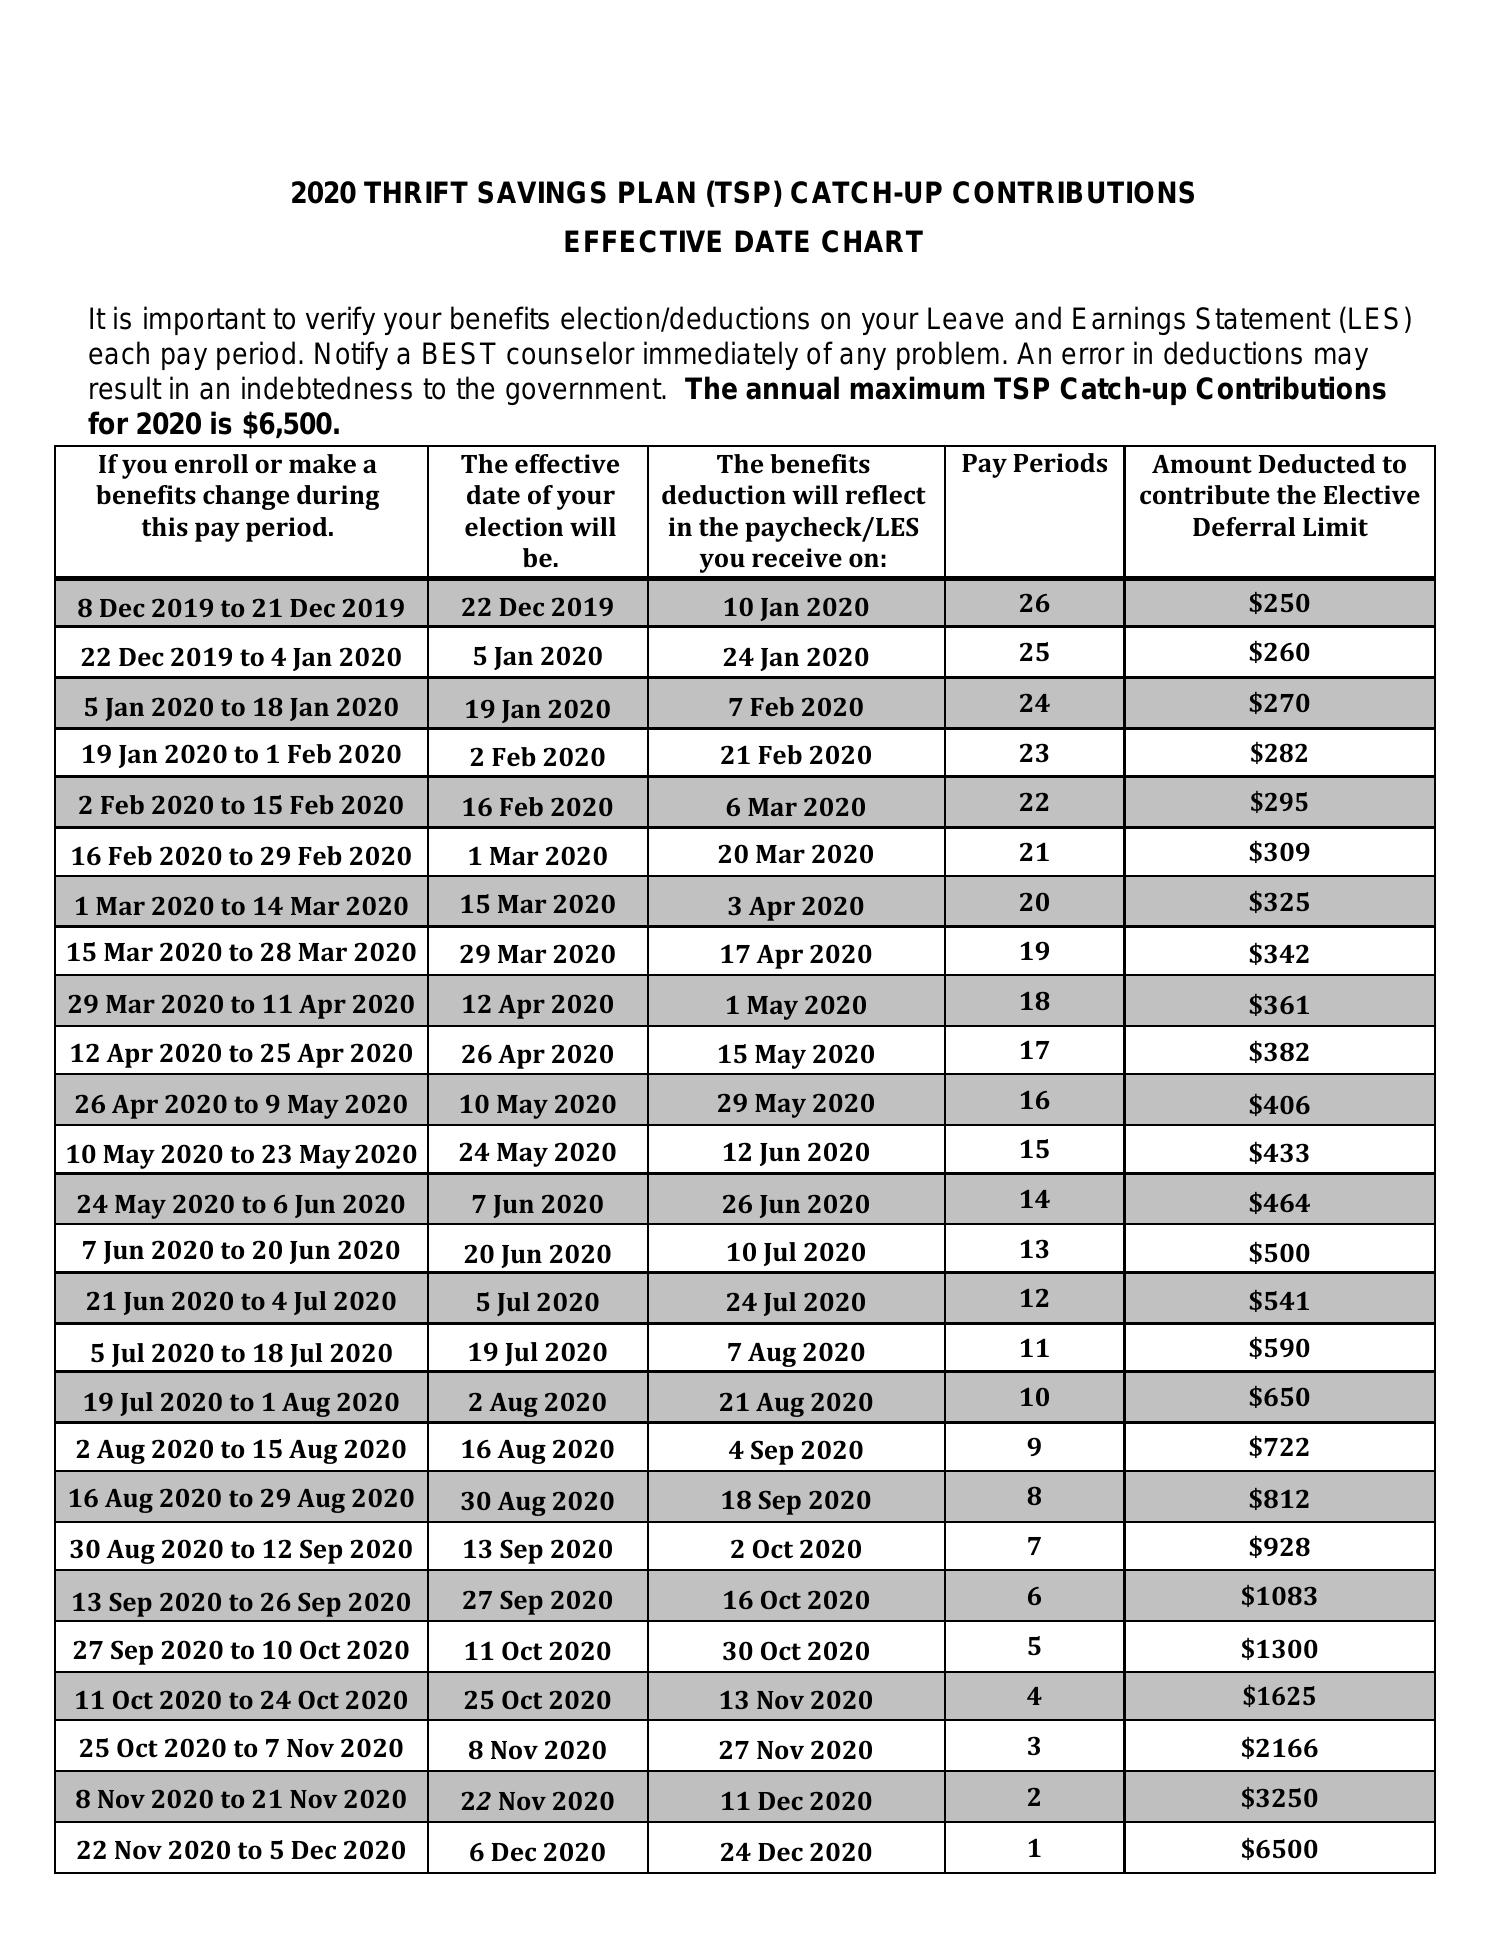 2020 TSP CatchUp Contributions and Effective Date Chart.pdf DocDroid